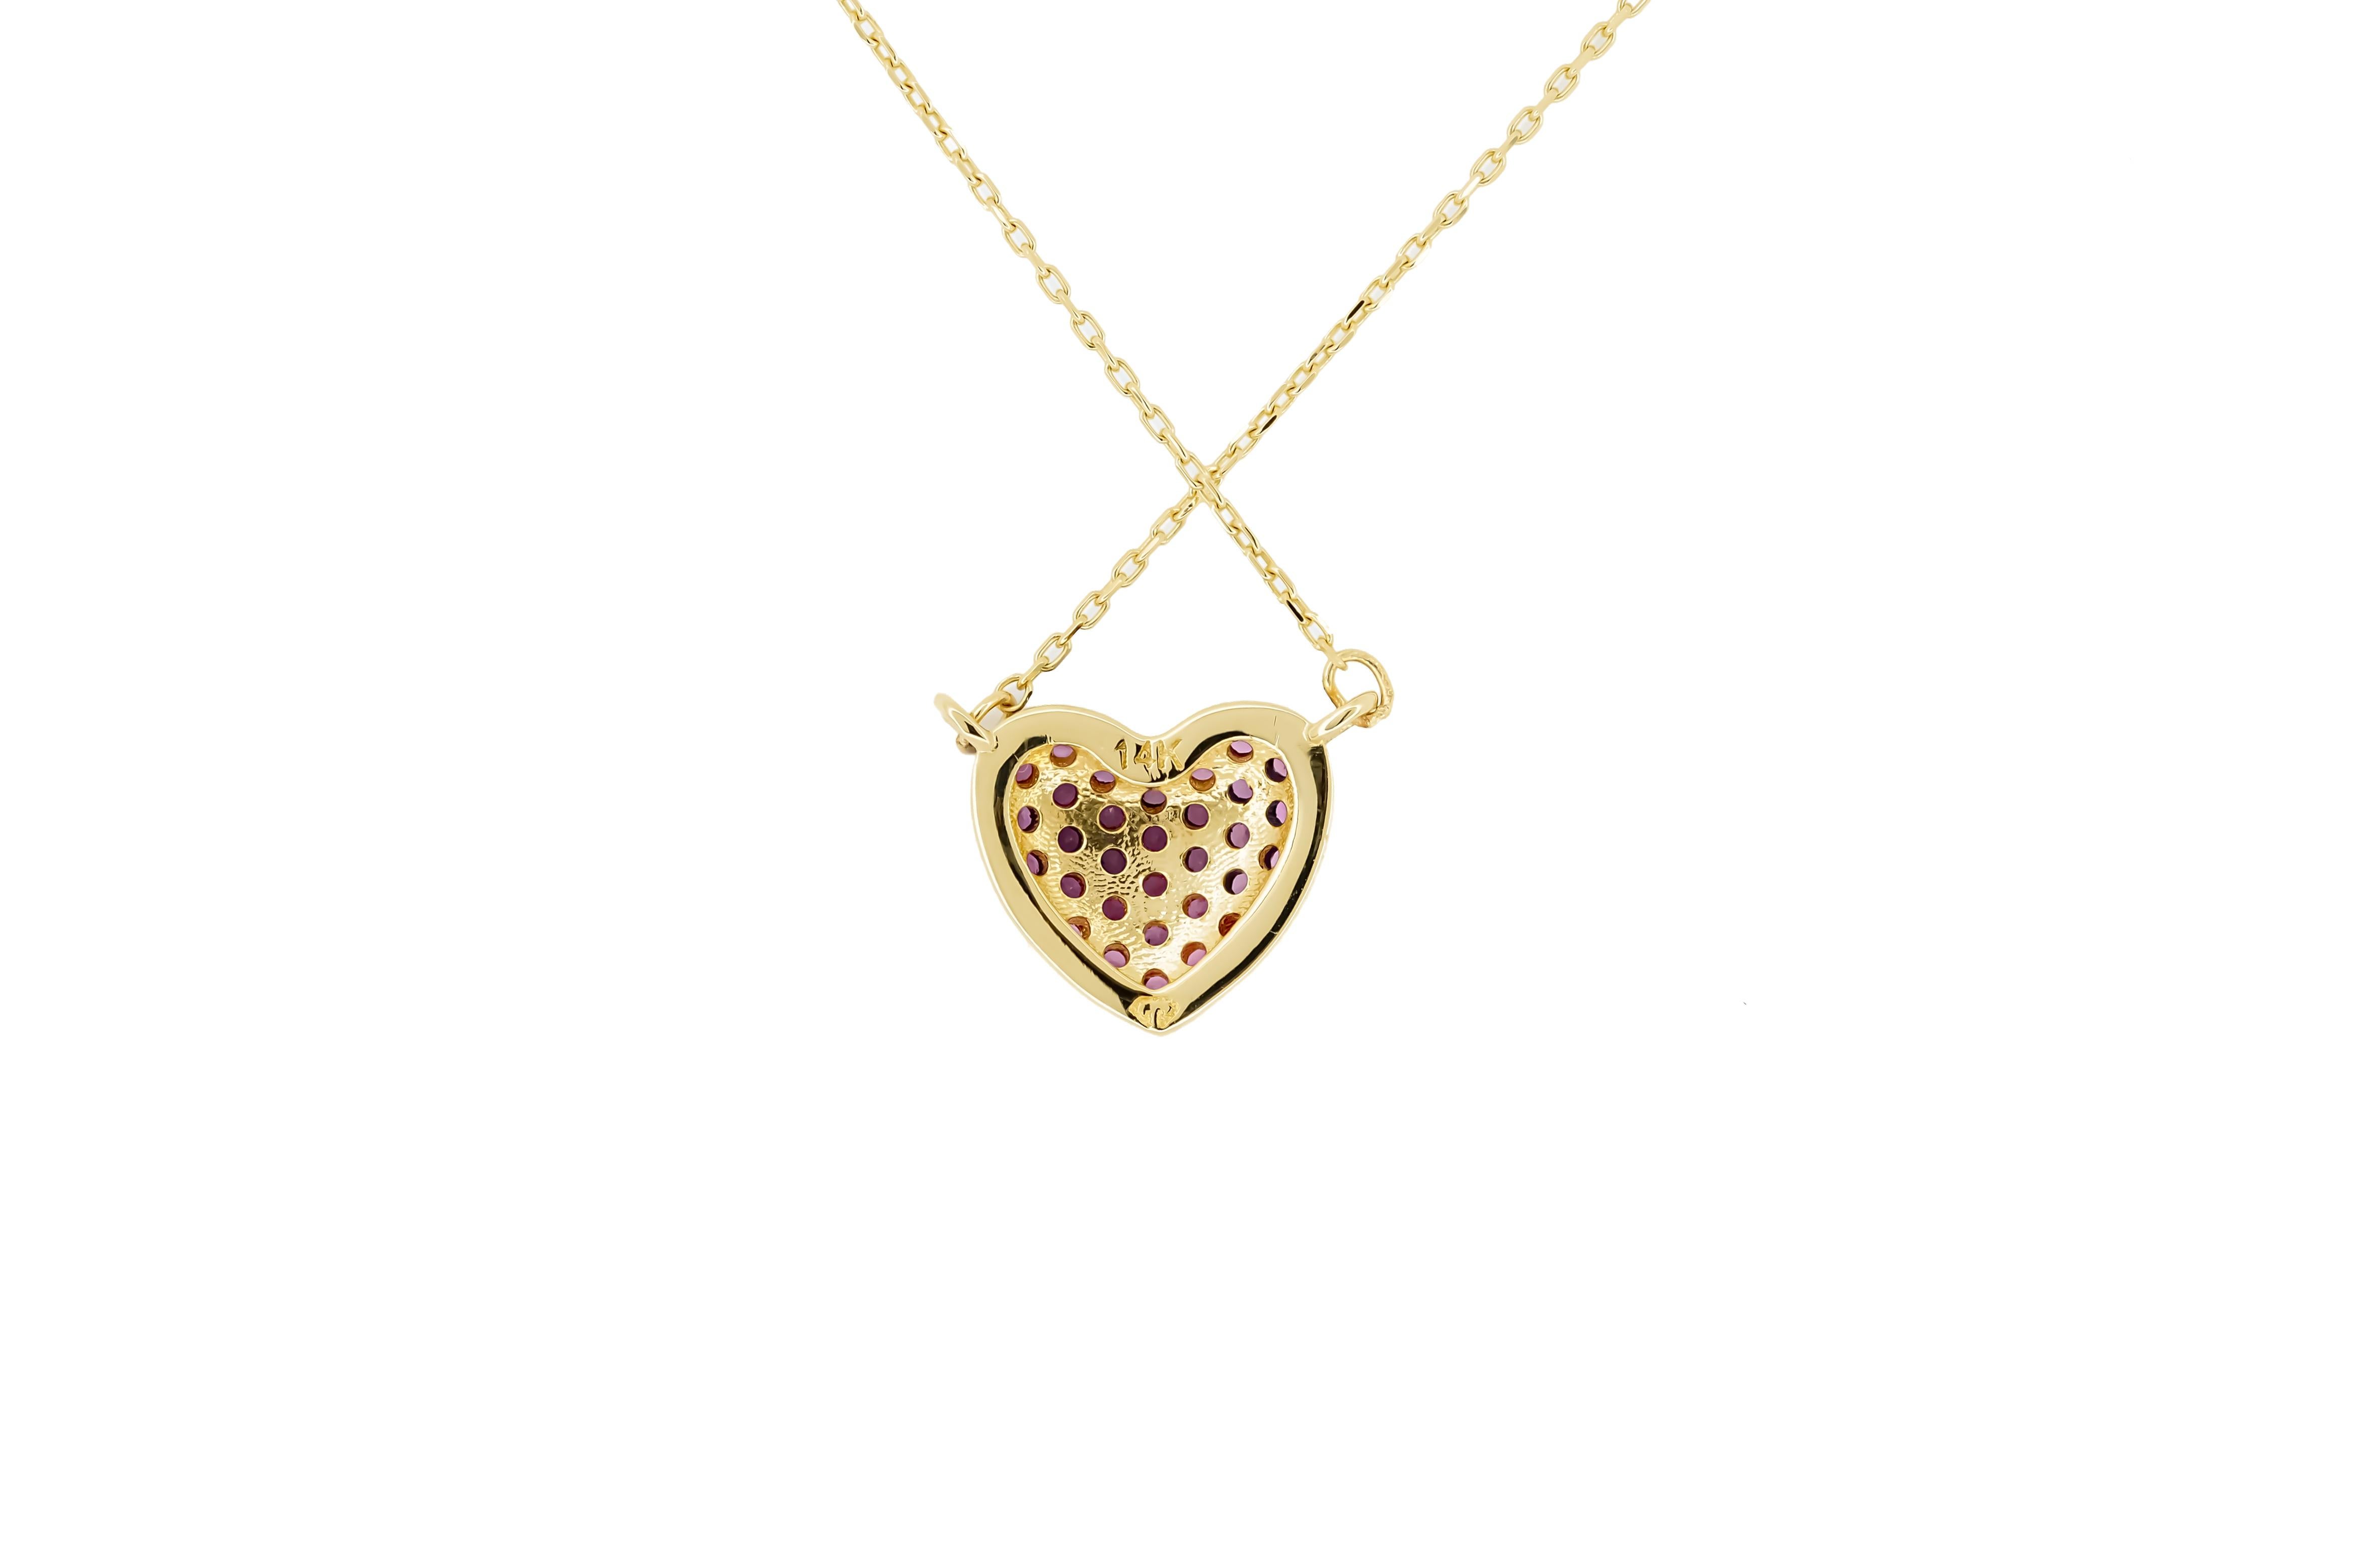 Modern 14k Solid Gold Heart Pendant Necklace, Heart Necklace for Women For Sale